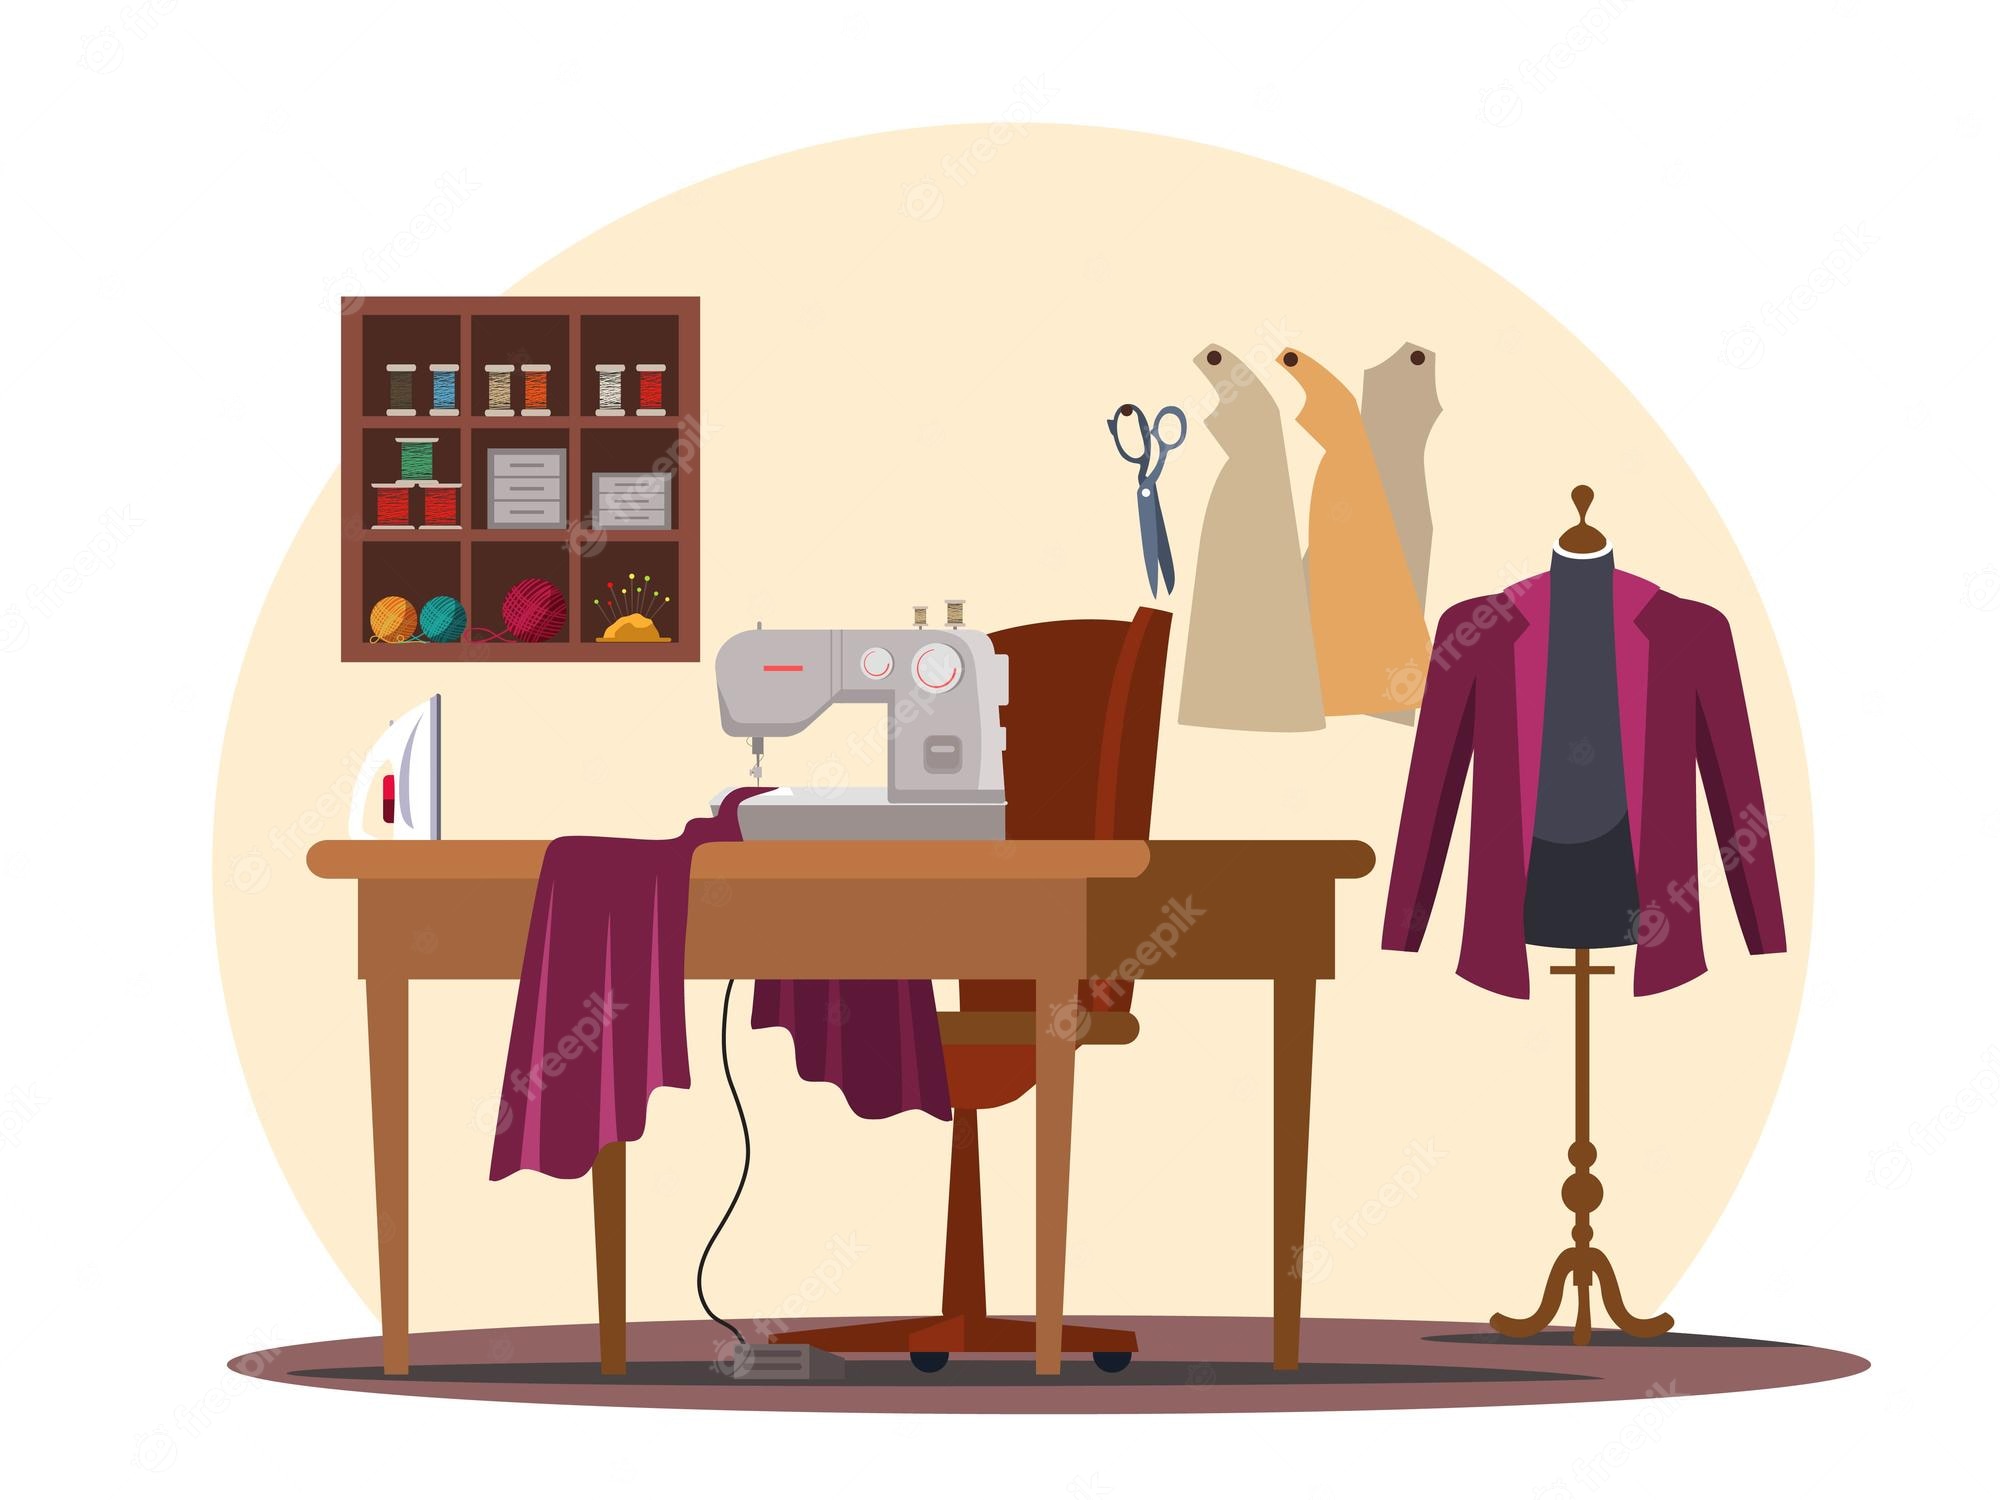 How to Find the Best Online Tailor for Women's Clothing?